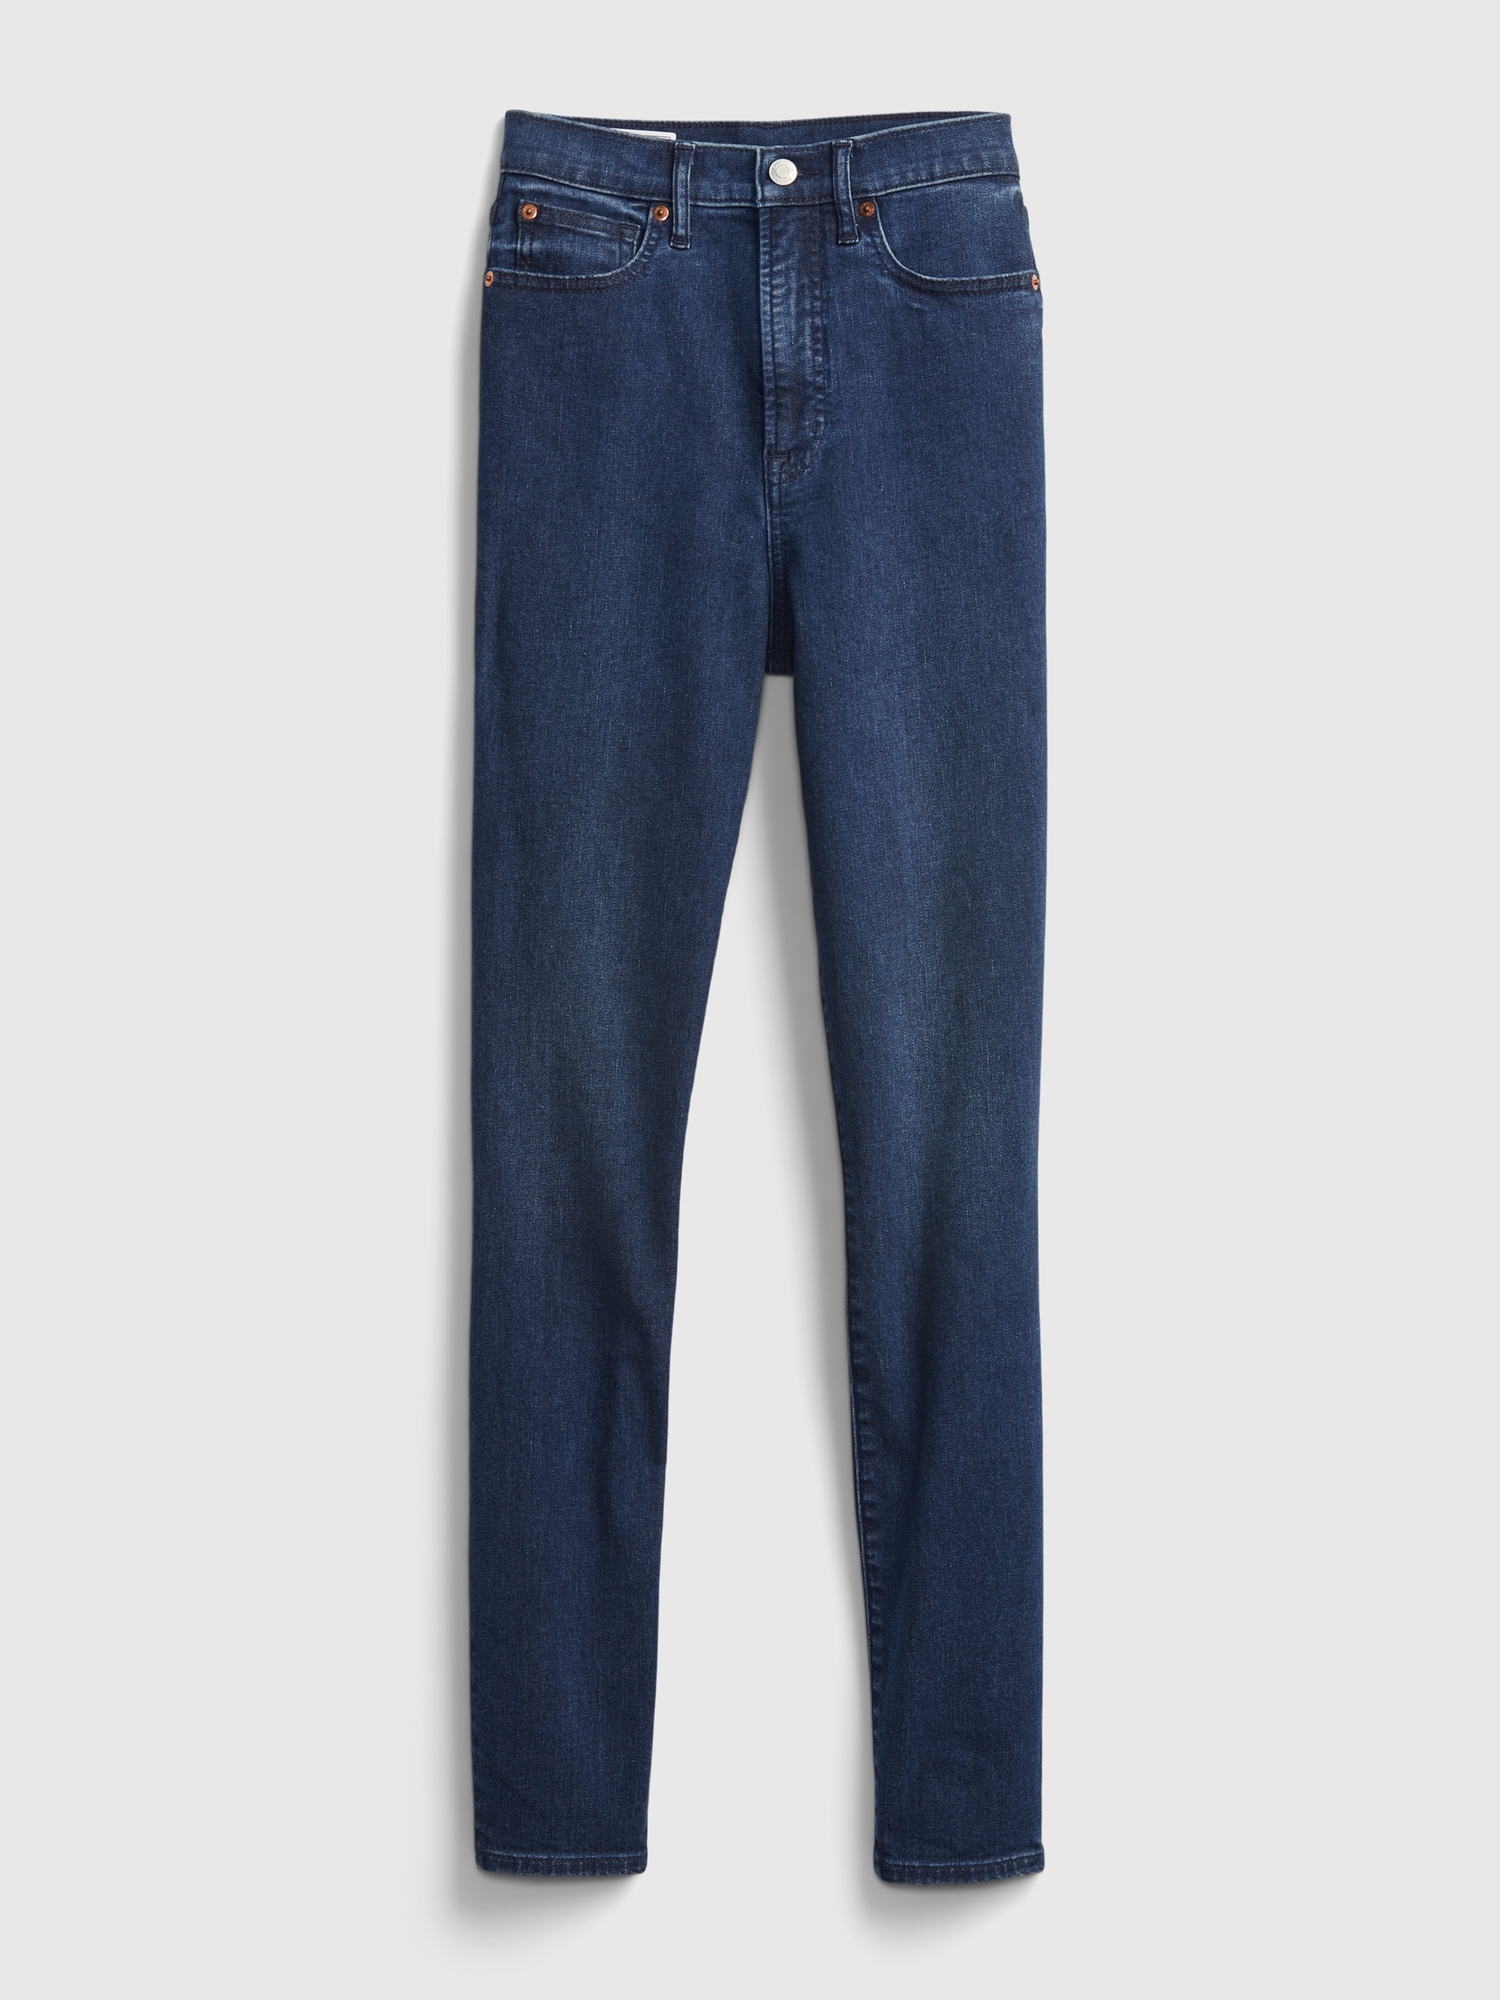 Sky High Rise True Skinny Jeans with Washwell | Gap